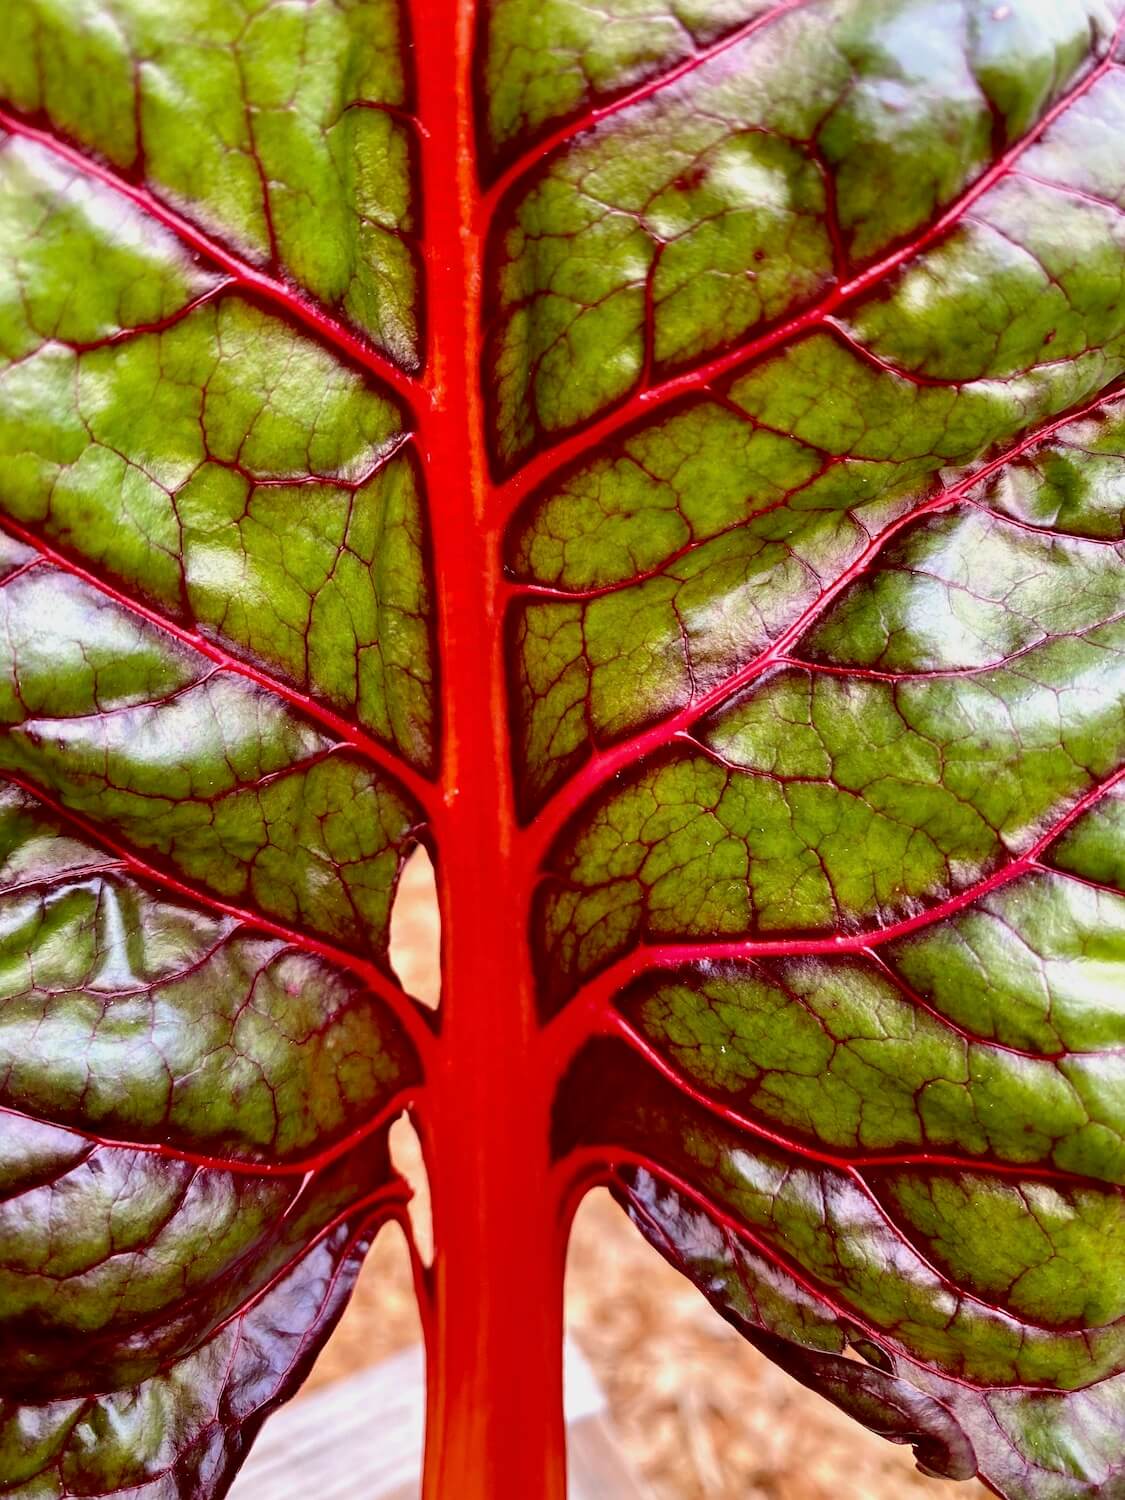 An up close shot of a piece of red chard reveals the blood red stalk and veins of the leave, flowing to the waxy green leaves of the branch.